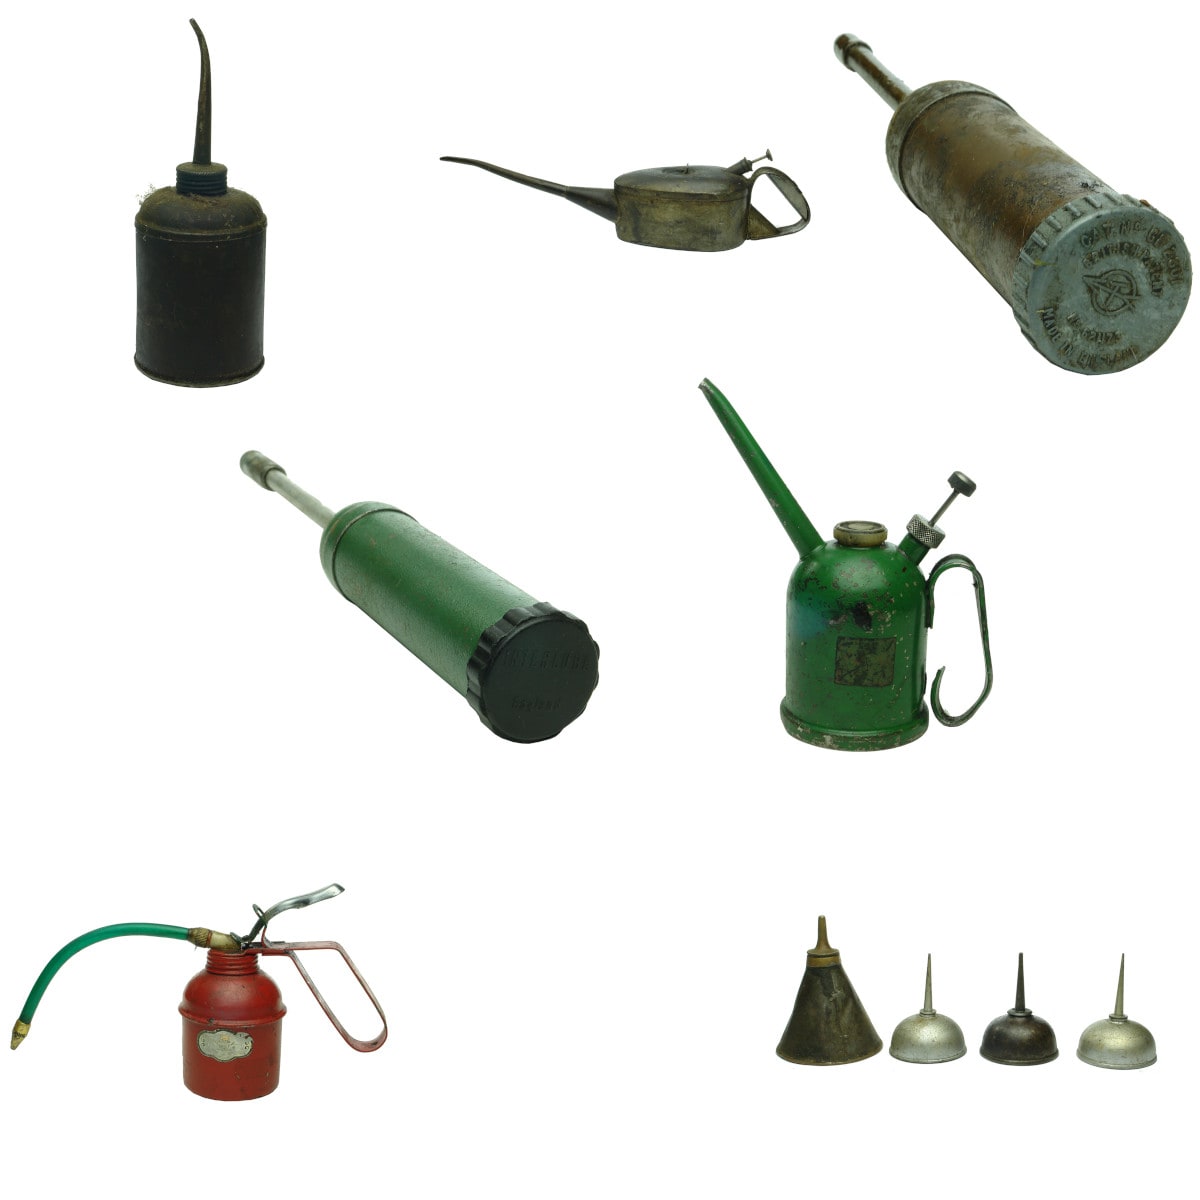 10 Oil Items: Six different Oilers/Grease Guns. Rega; Interlube; Unmarked etc. and 4 Small Oil Cans - Oilers. 3 x domed ones and early conical with brass fittings.